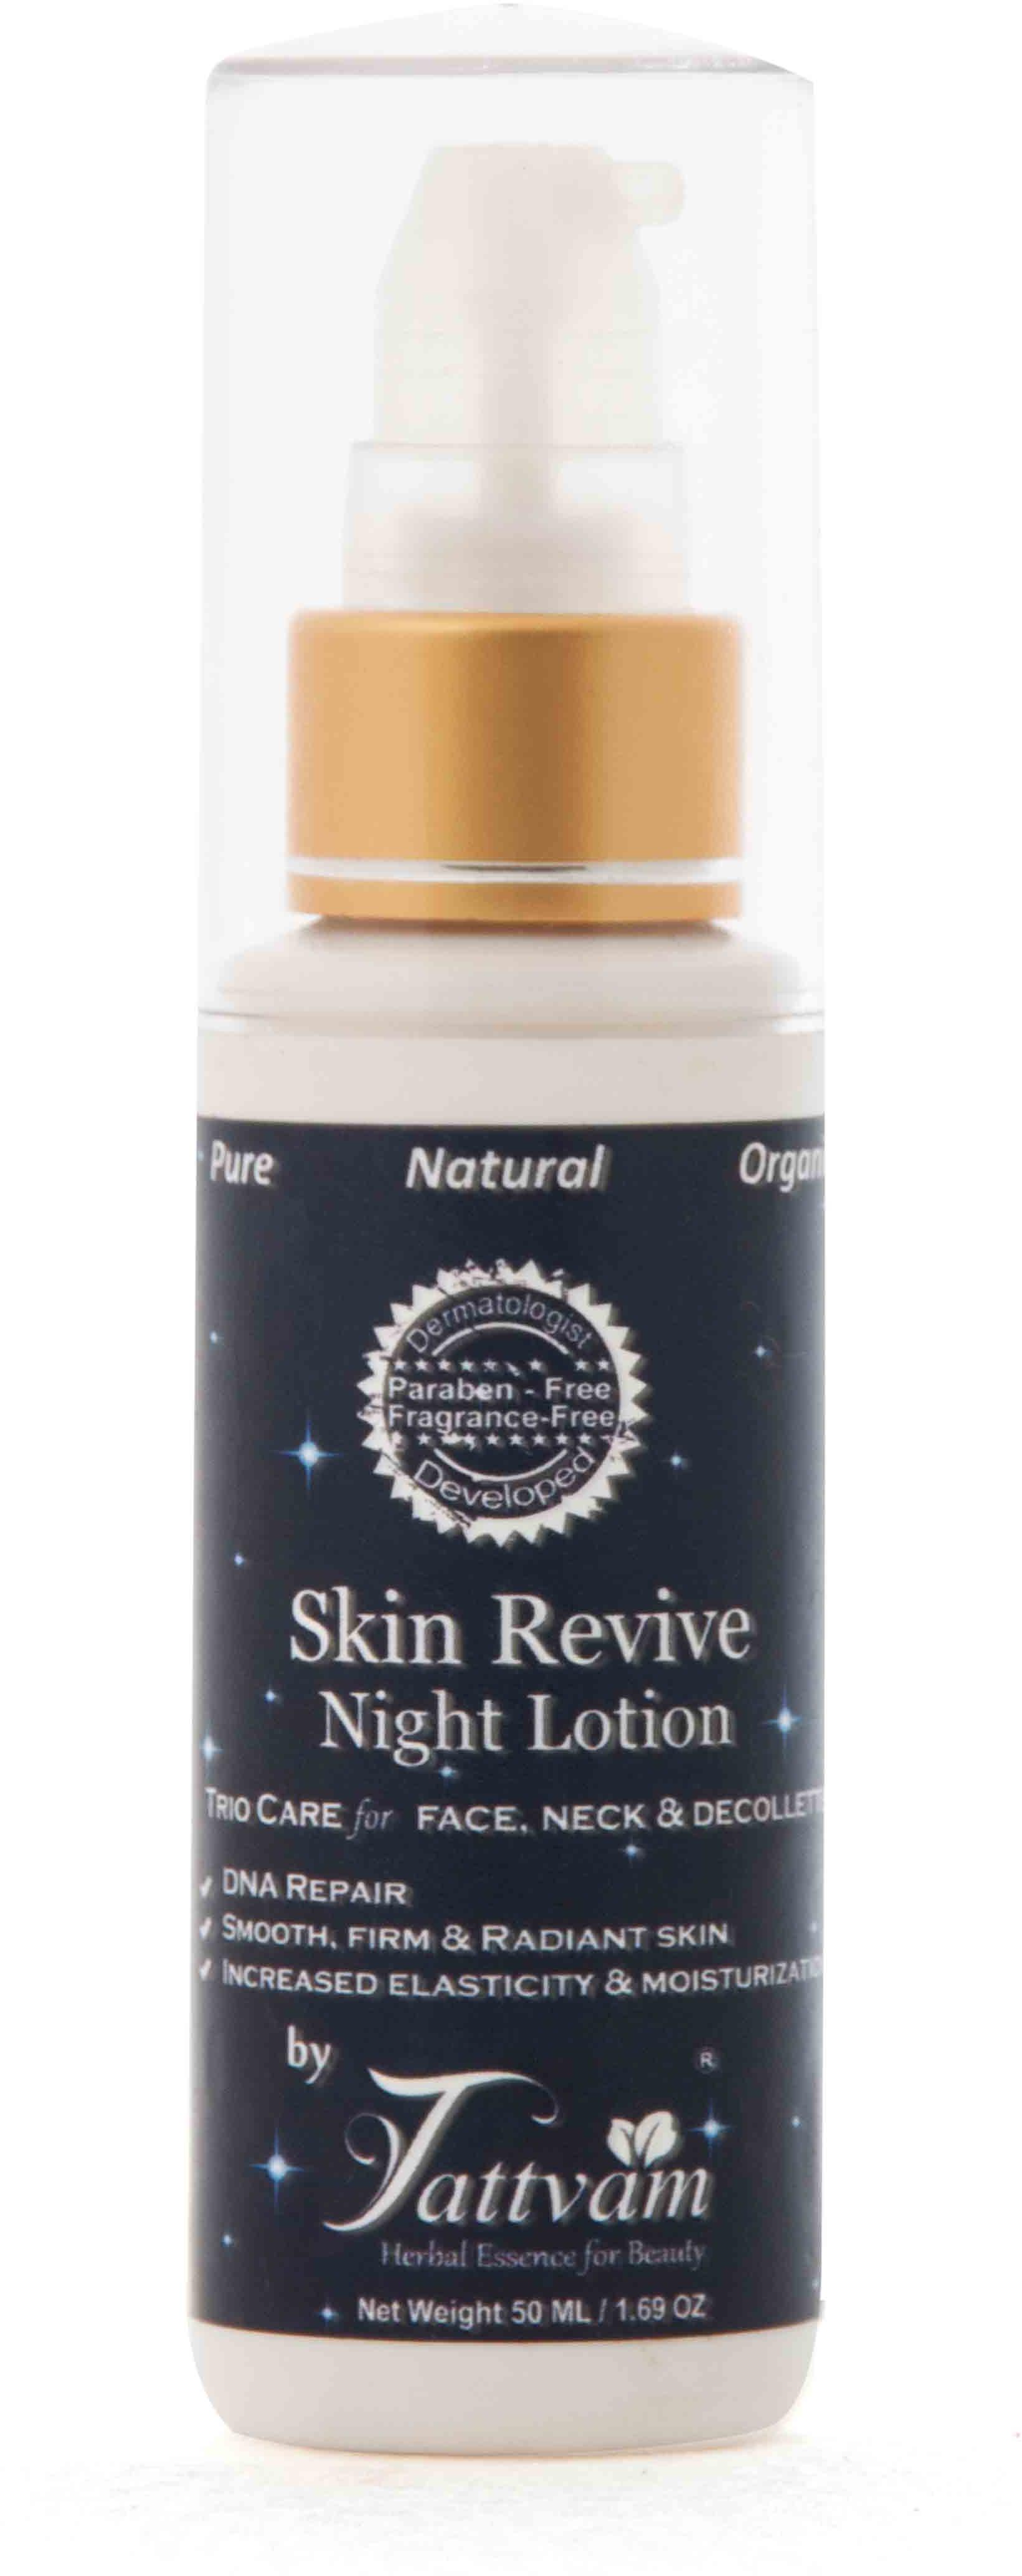 Skin Revive Night Lotion